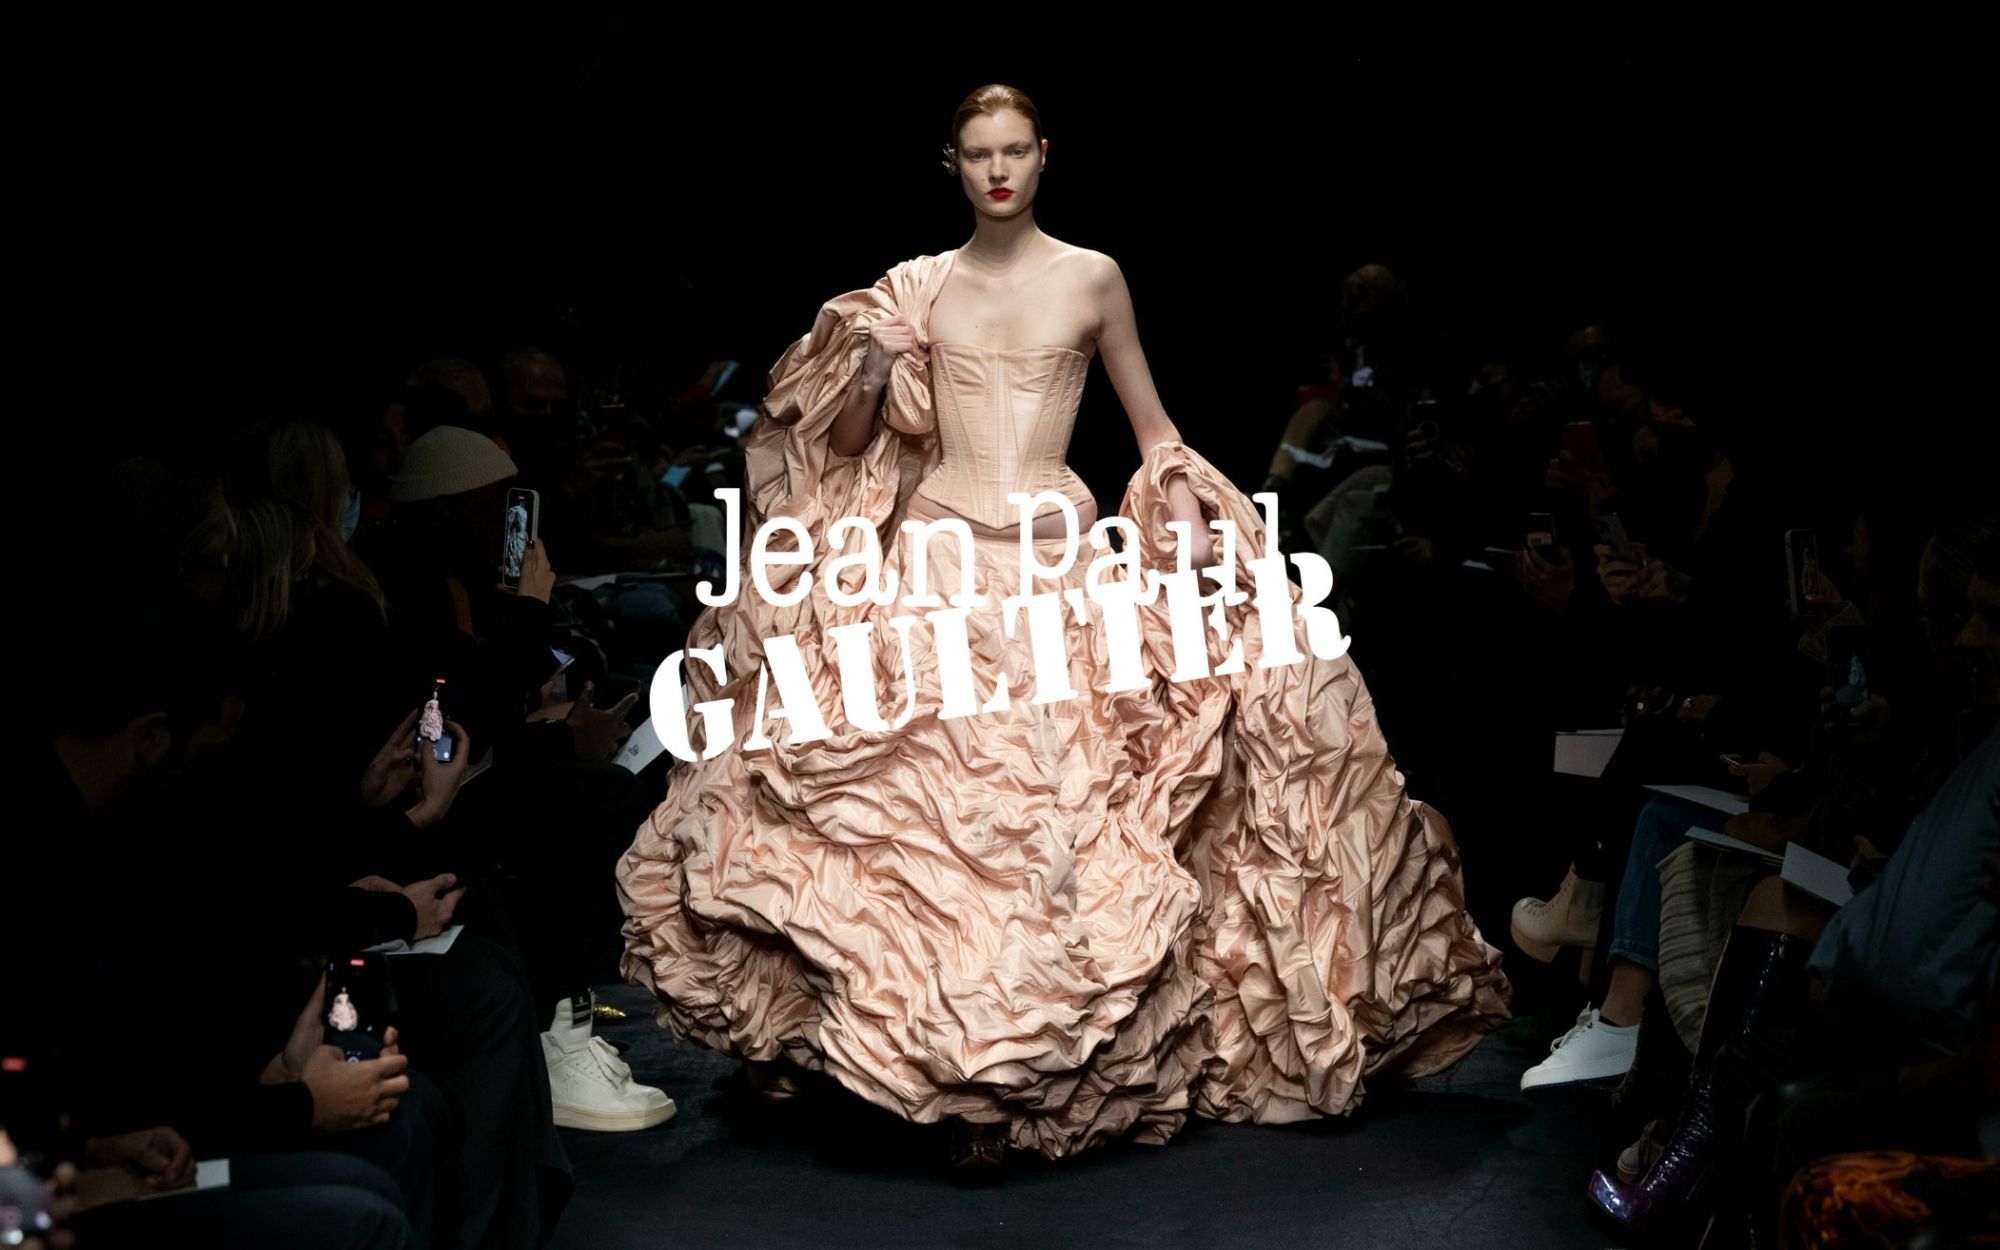 Why Jean-Paul Gaultier's collaborative method works so well